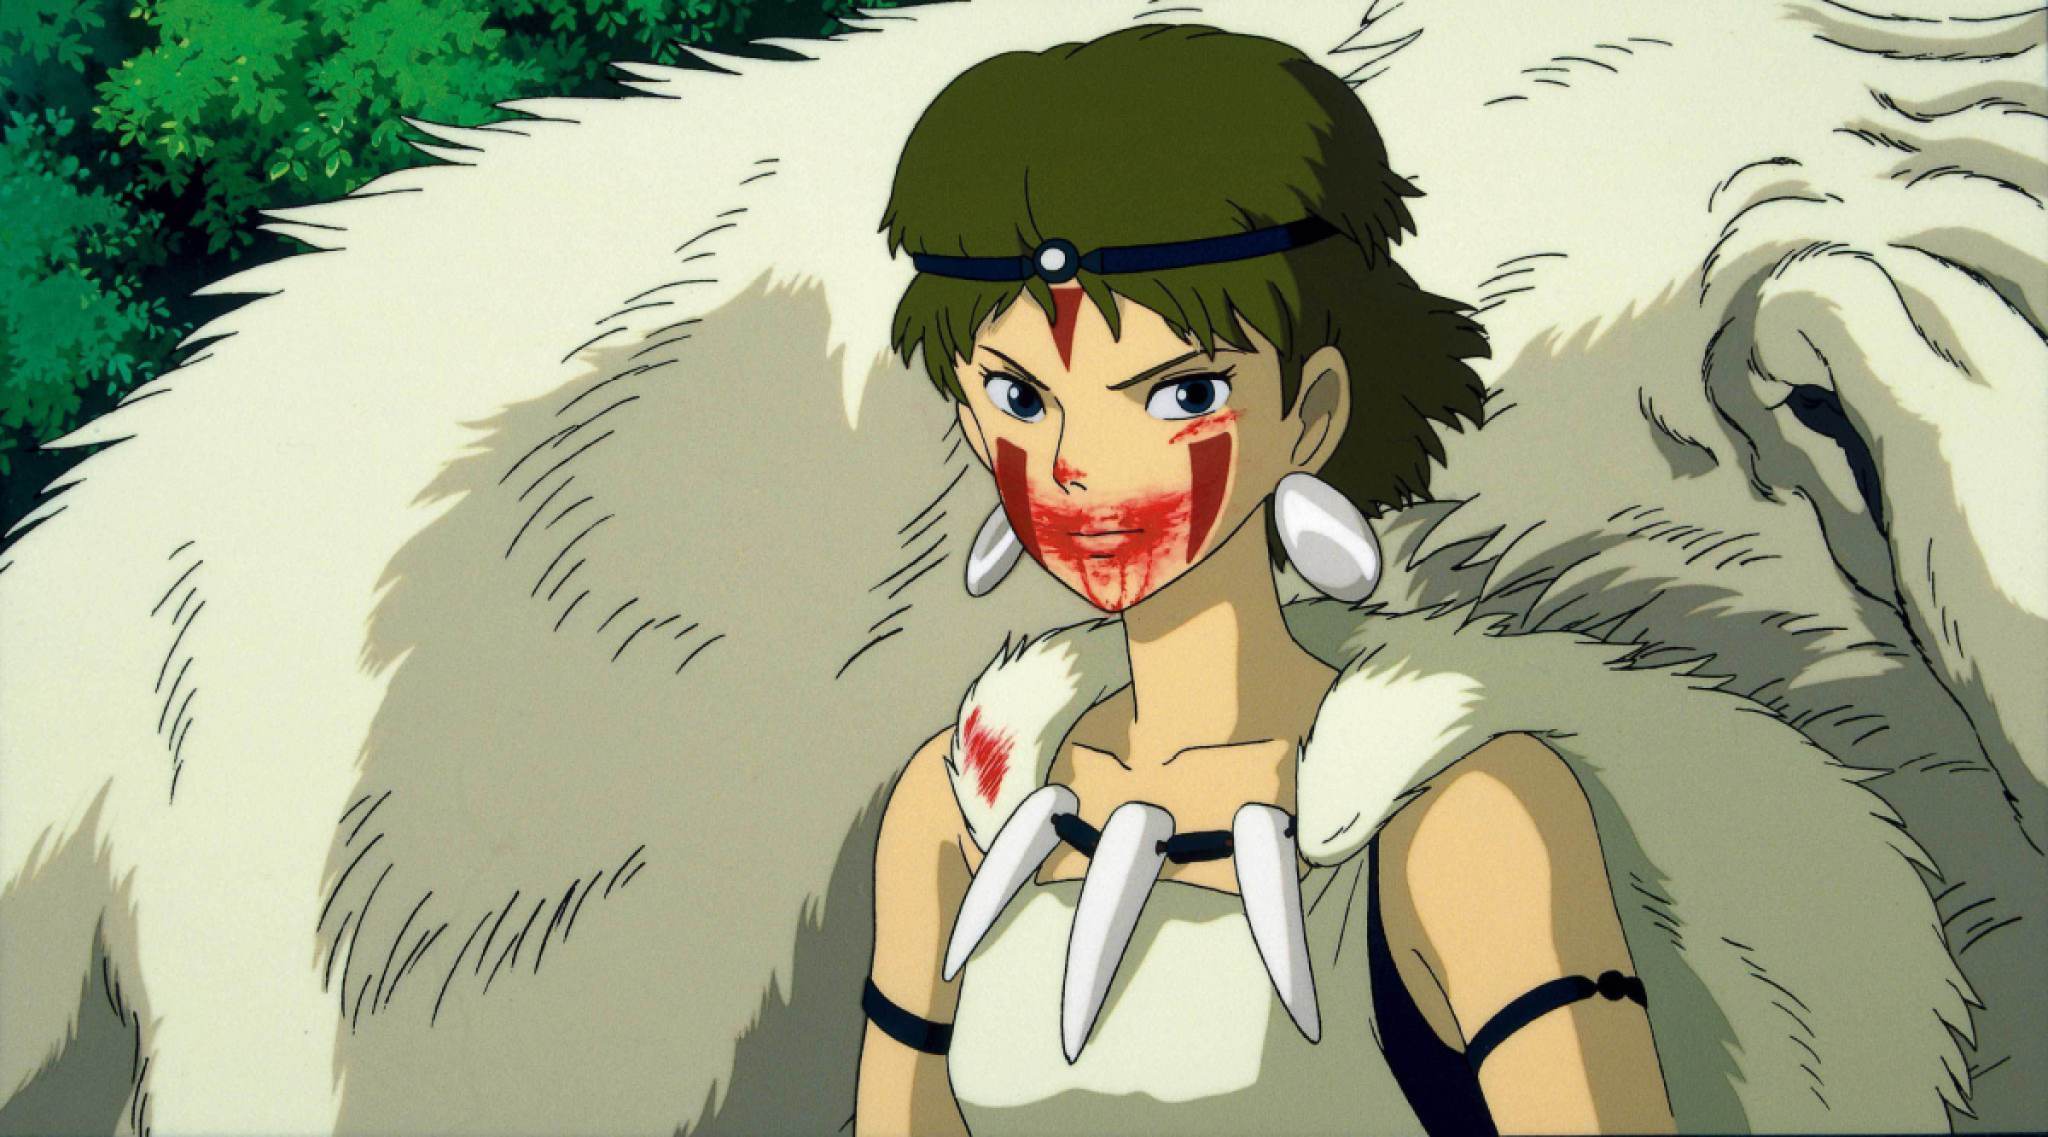 San with blood smeared over her face with Moro in the background